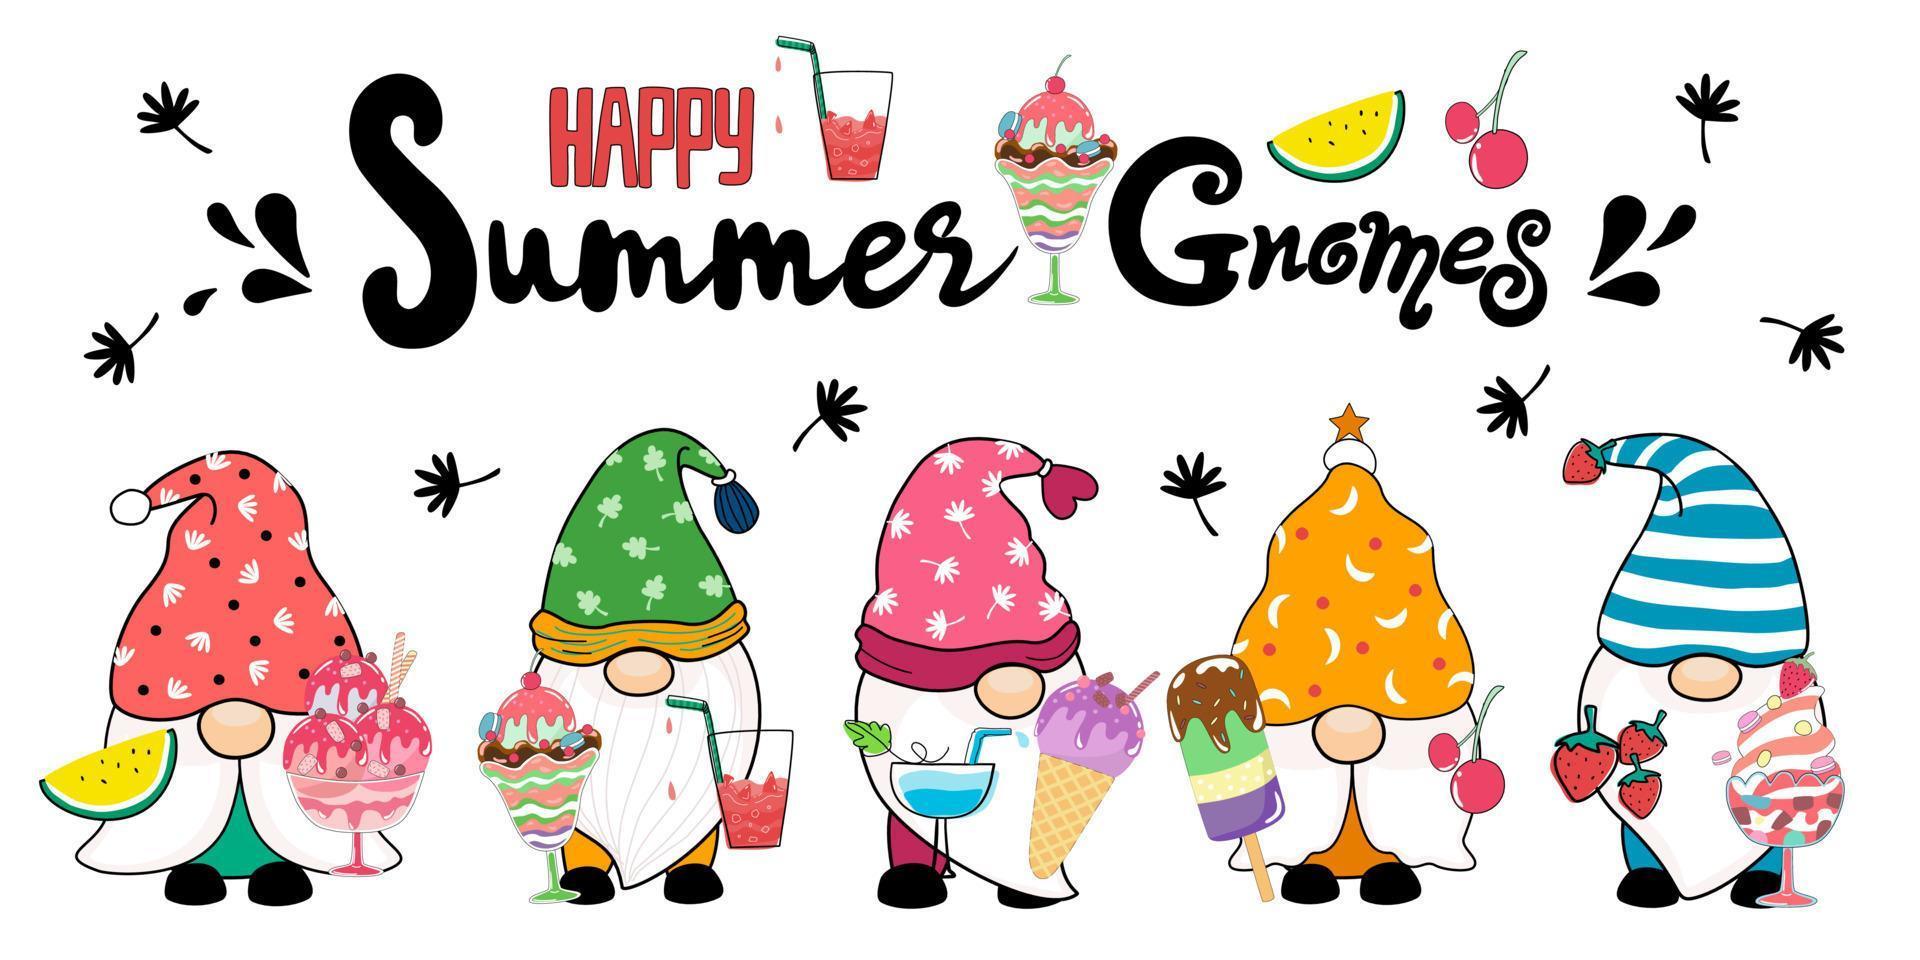 Gnome and sweet ice cream vector illustration designed in doodle style. In summer theme for decoration, stickers, shirt designs, art for kids and others.